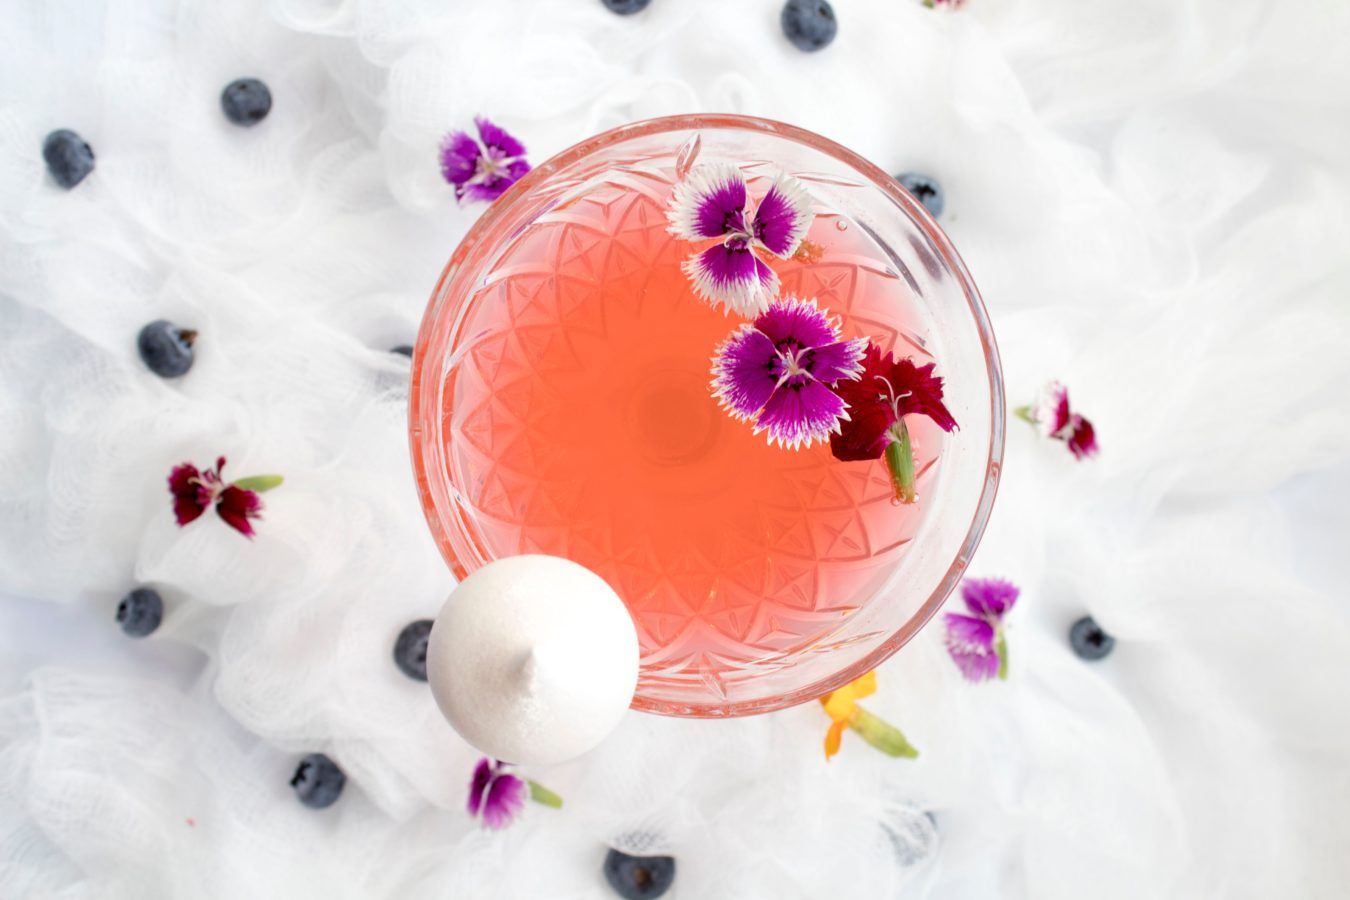 7 cocktails to make at home and toast to International Women’s Day 2021